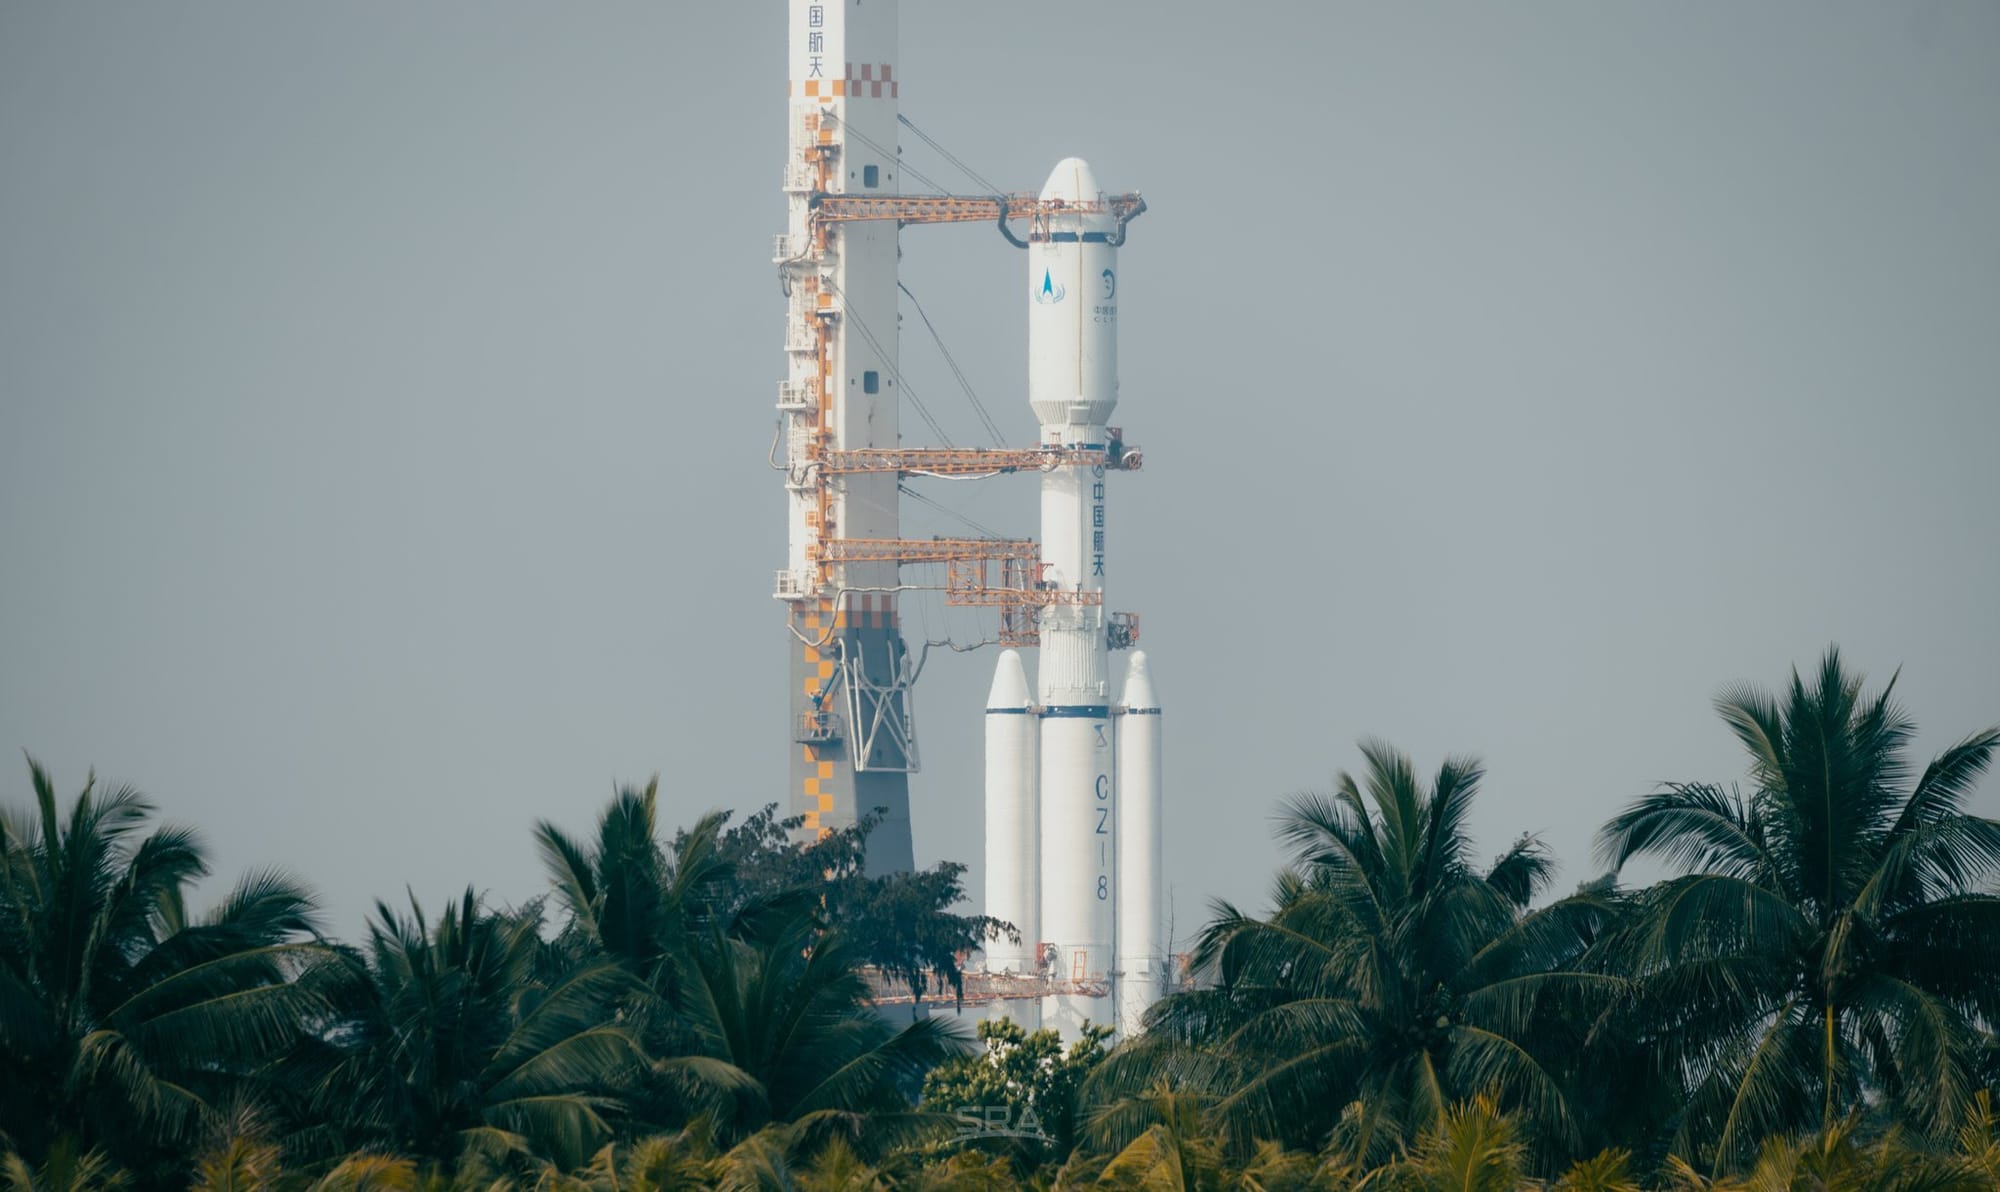 The Long March 8 being transported to its launchpad ahead of launch on the 20th.